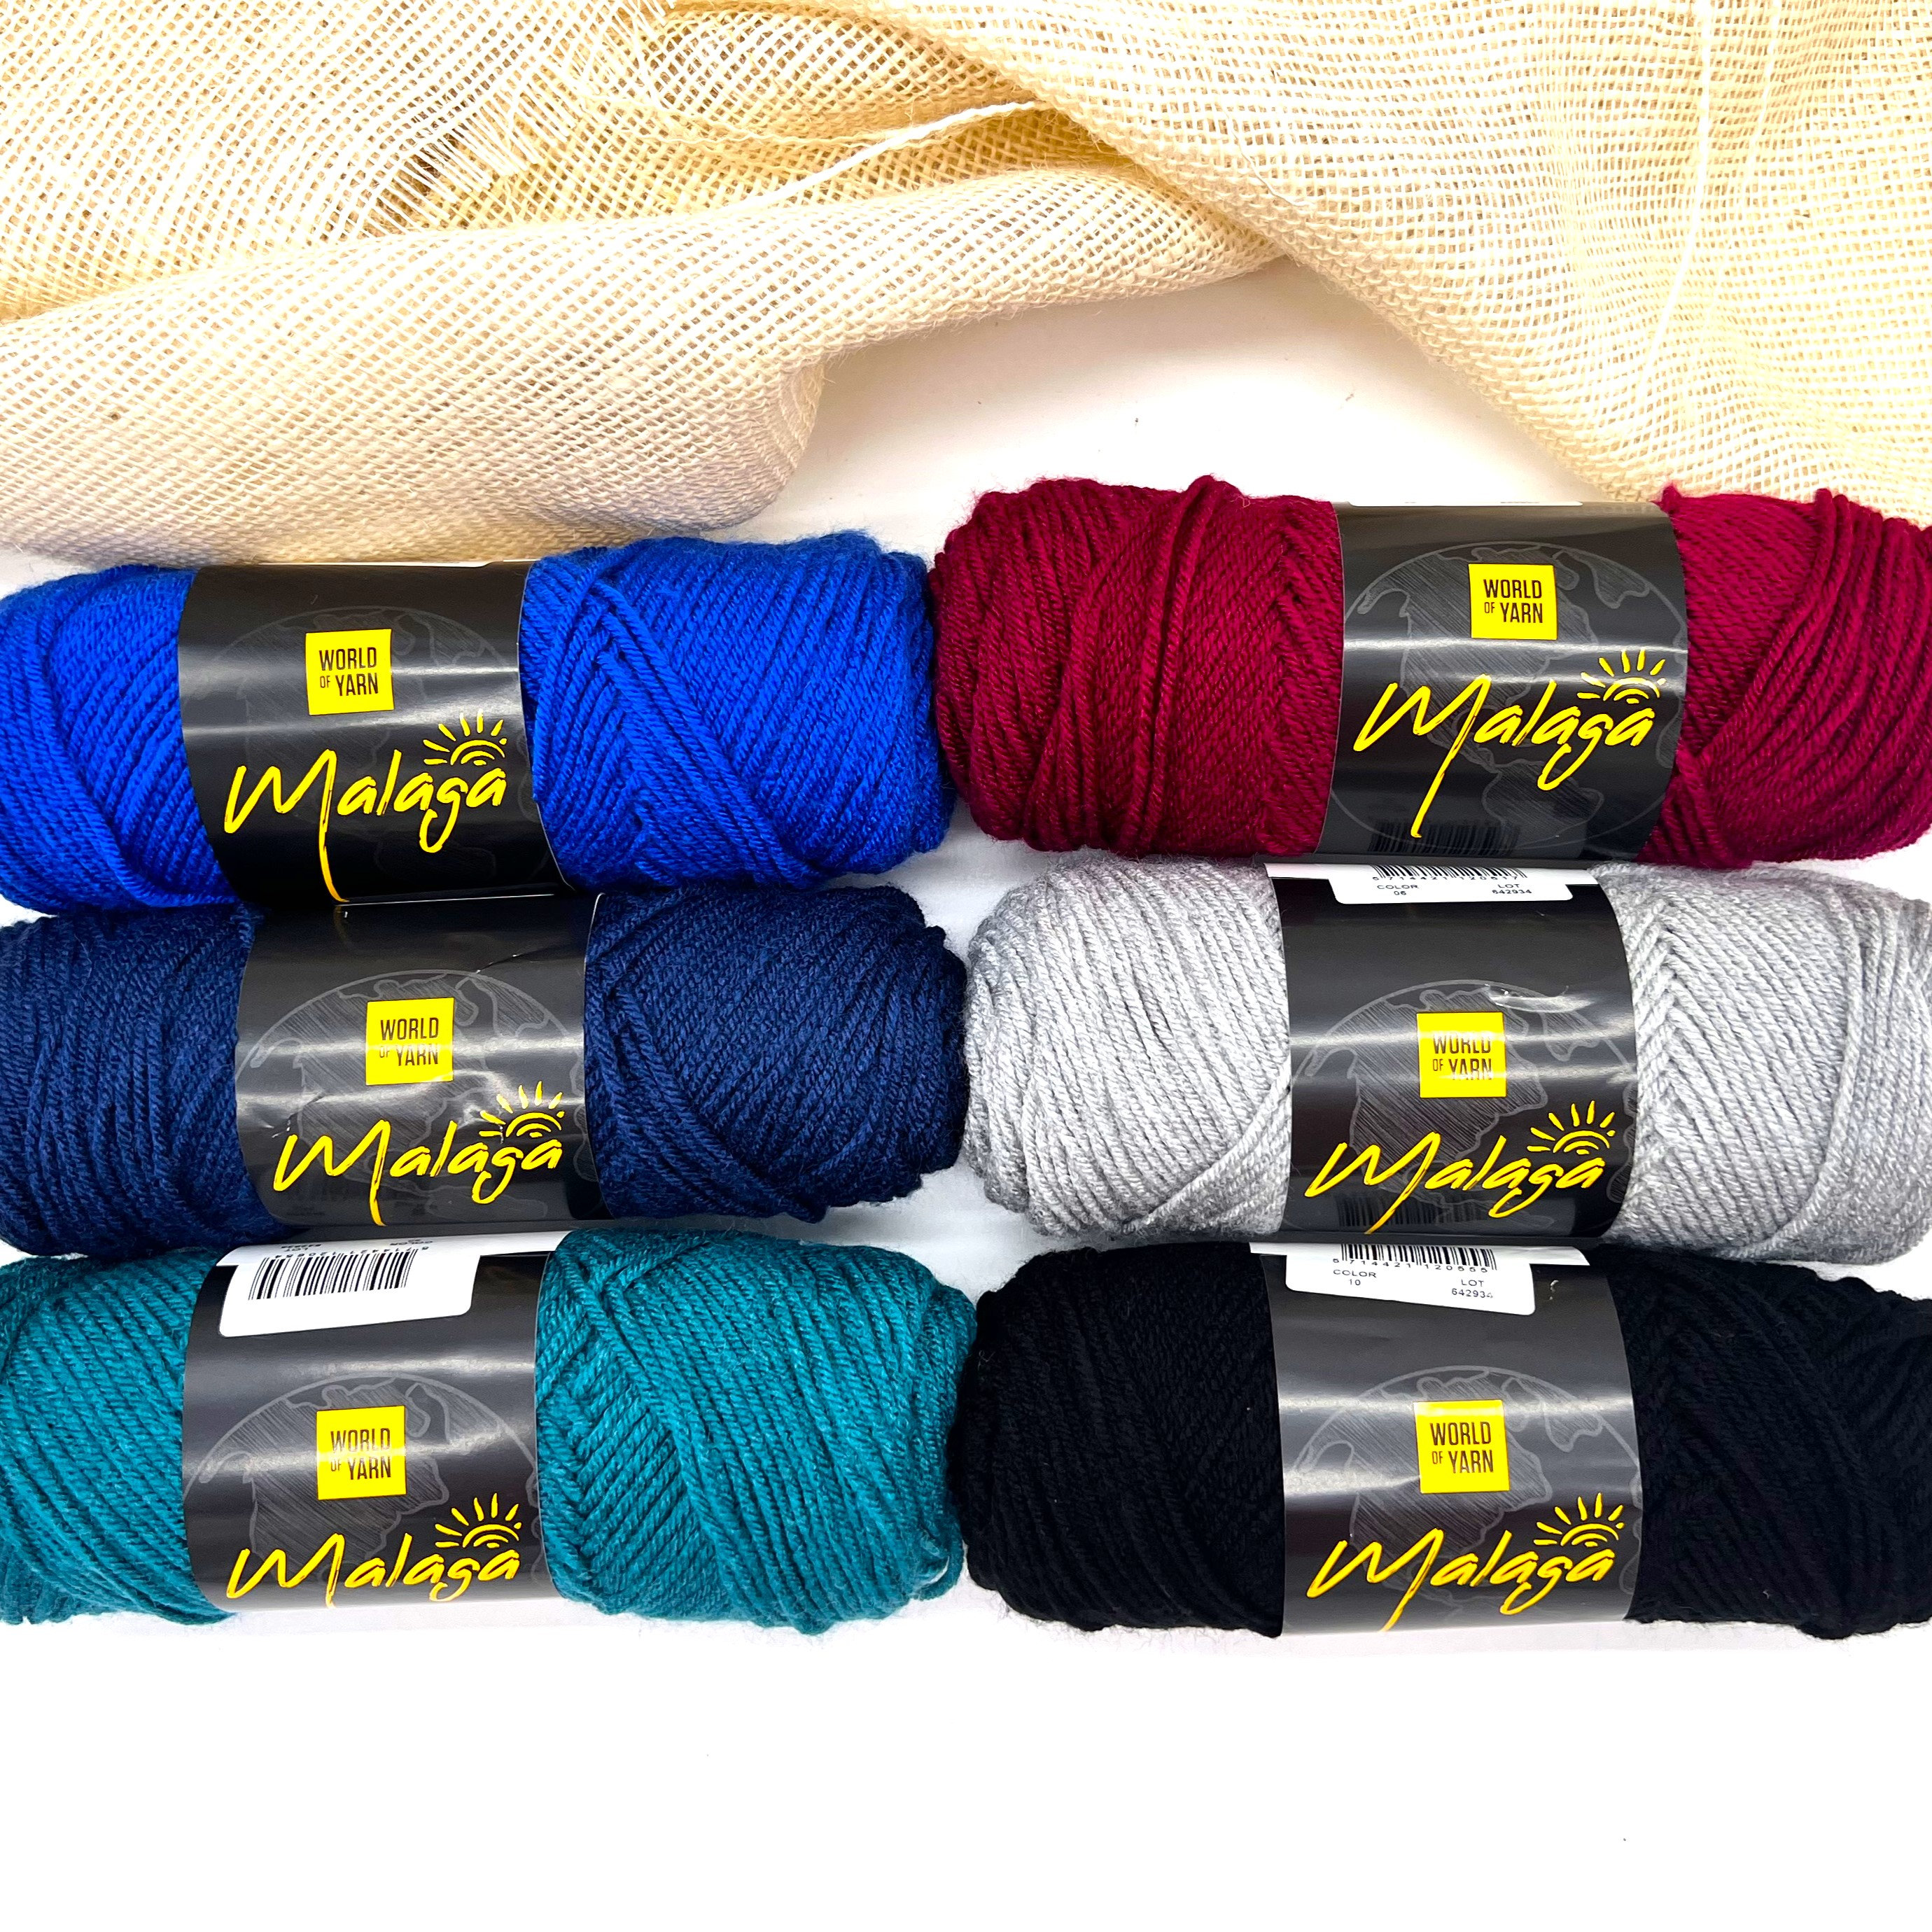 Scheepjes Yarn Whirl, Stone/River Washed Color Pack of 58 Skeins -10g Eash,  28 Yards, 78% Cotton & 22% Acrylic for Crocheting Knitting Yarn Kit